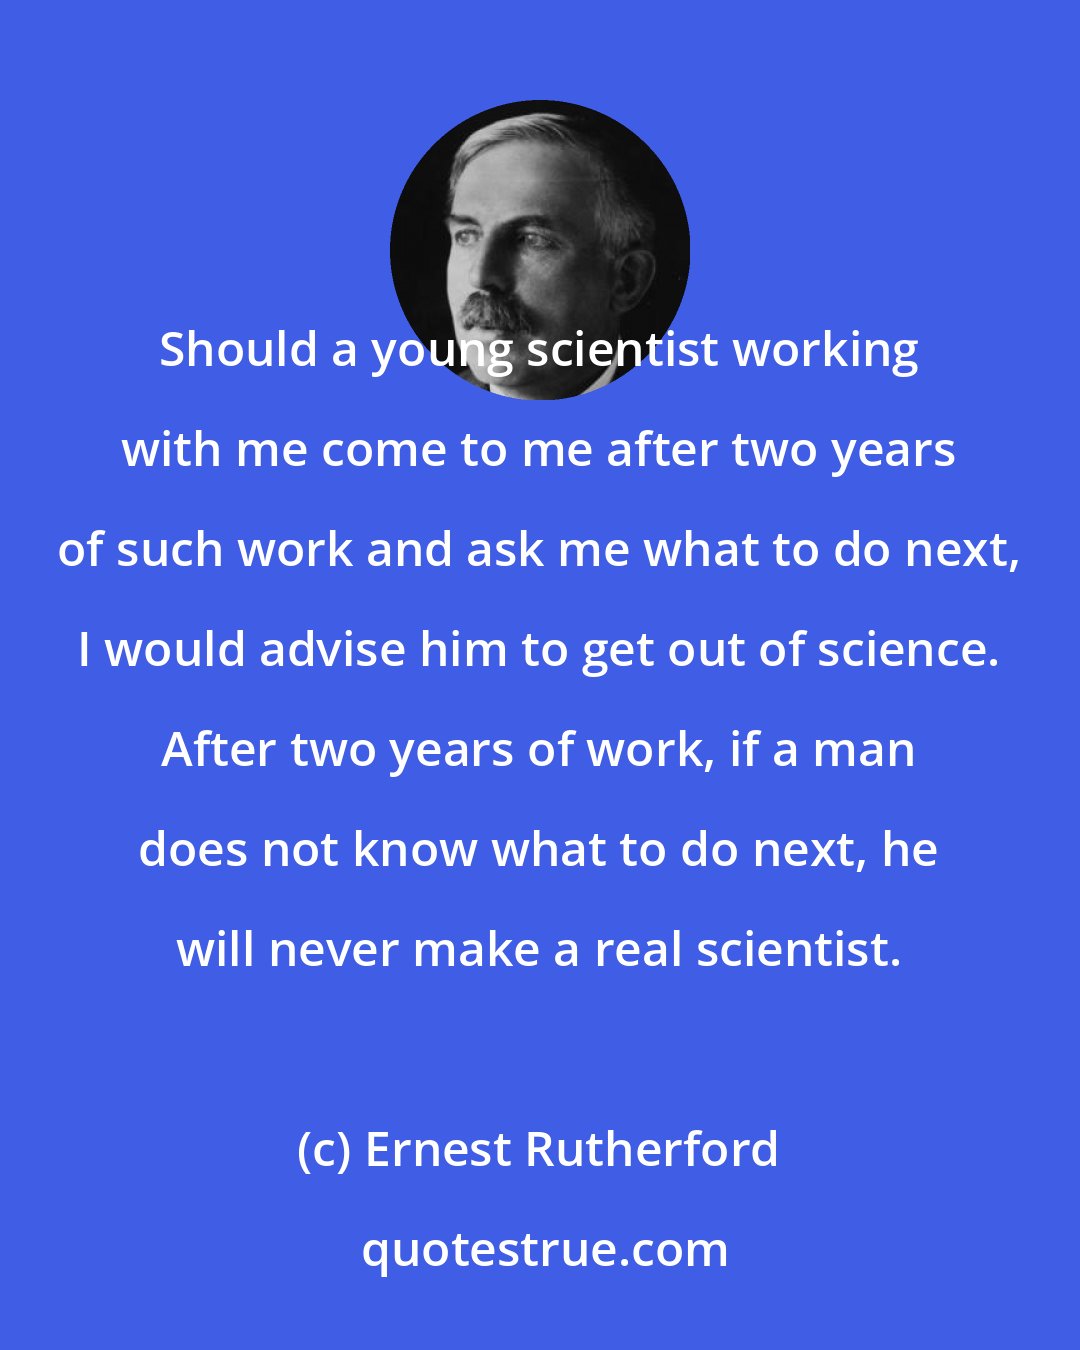 Ernest Rutherford: Should a young scientist working with me come to me after two years of such work and ask me what to do next, I would advise him to get out of science. After two years of work, if a man does not know what to do next, he will never make a real scientist.